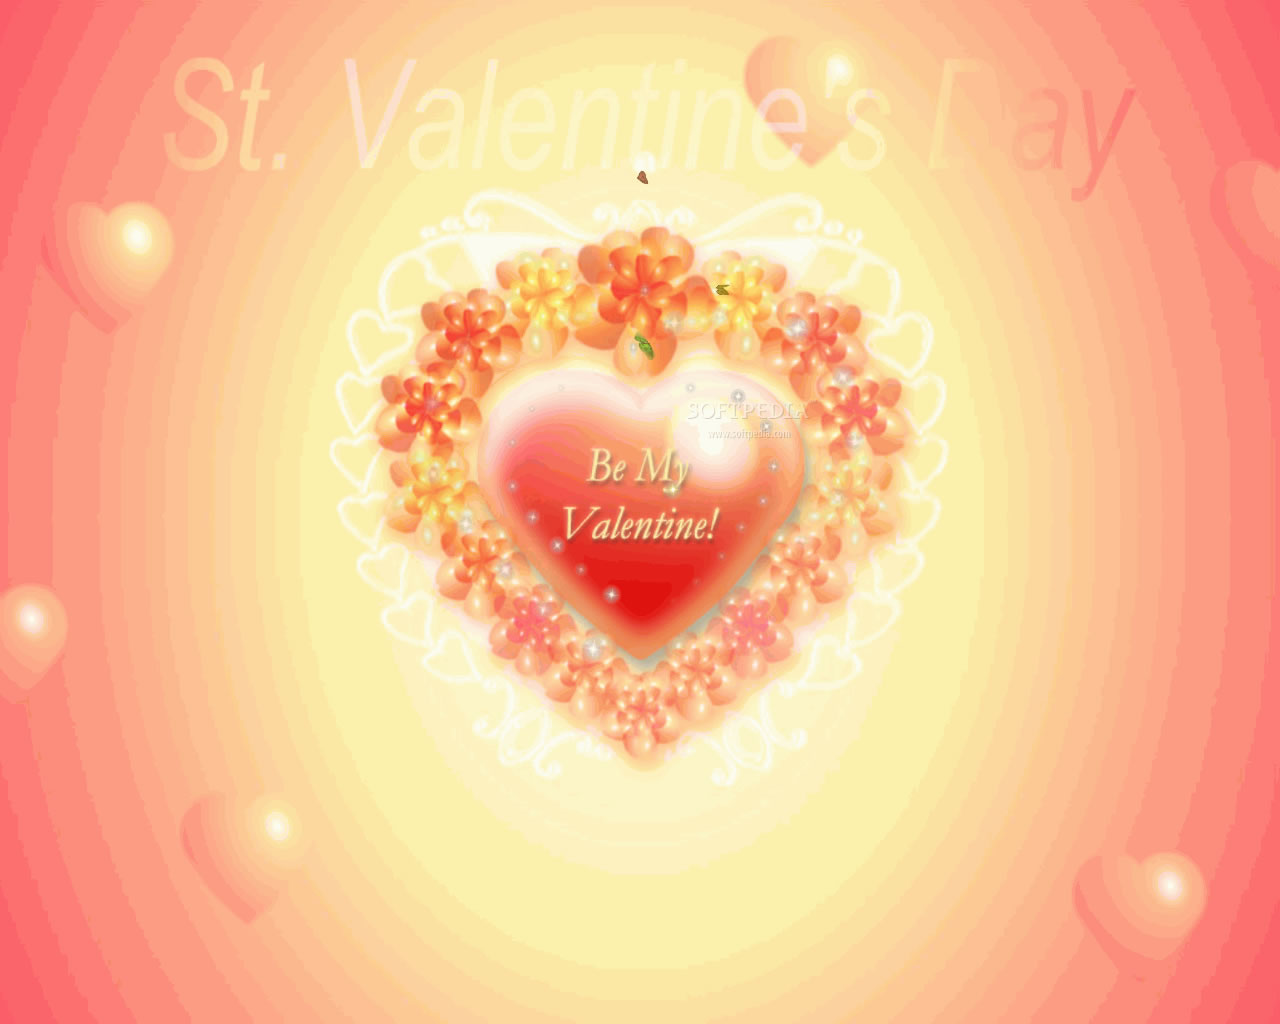 HD Wallpapers Free Valentine's Day   Be My Valentine wallpaper